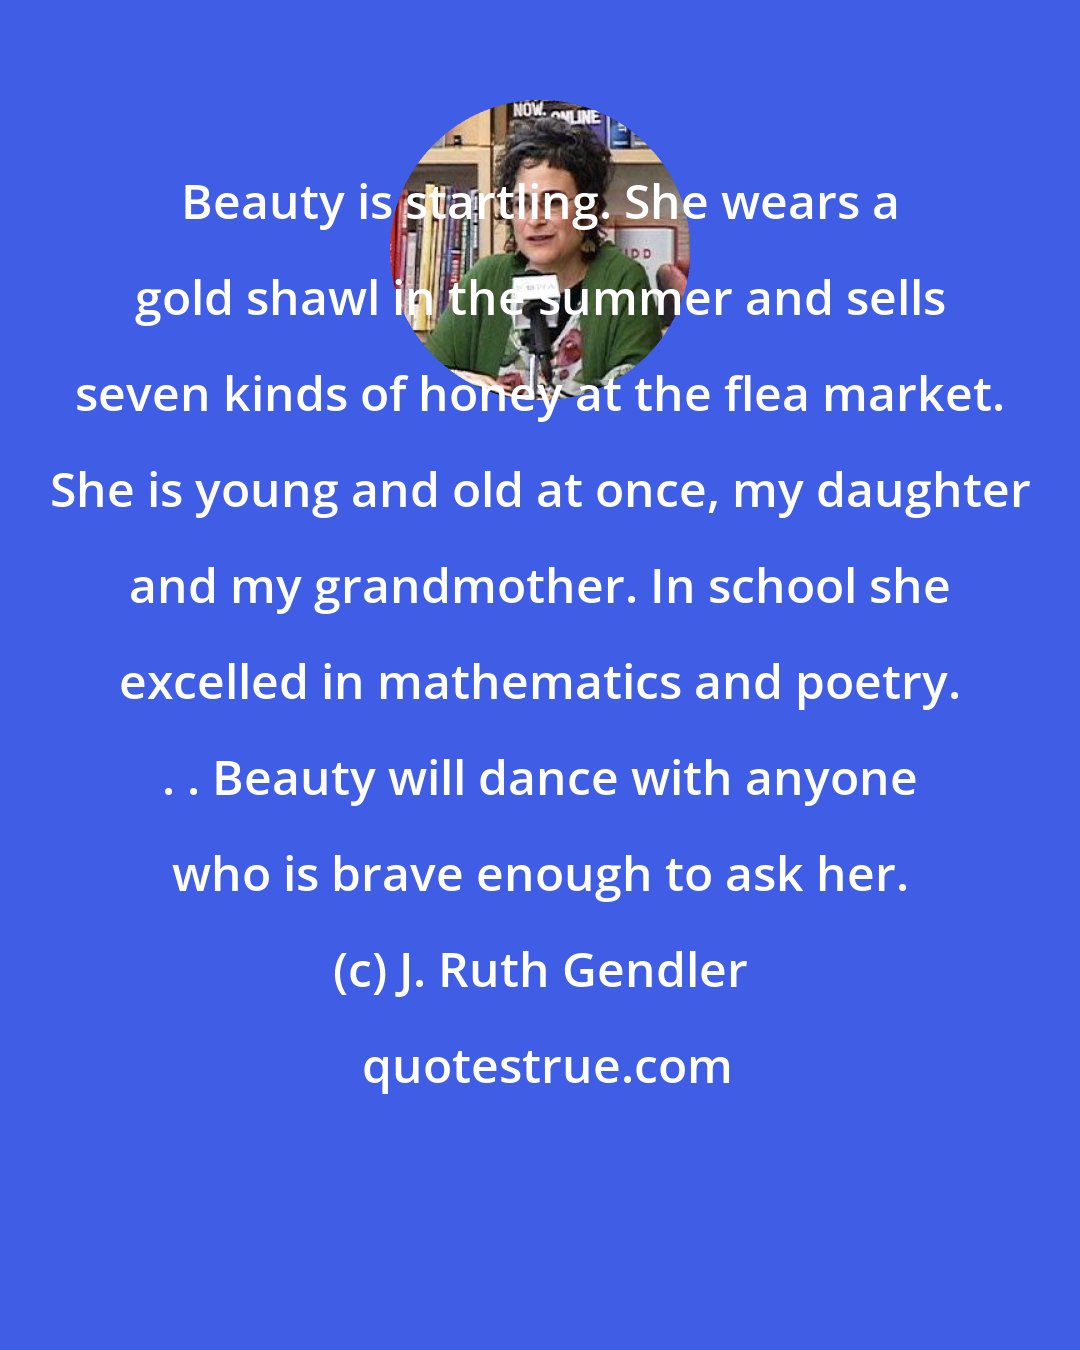 J. Ruth Gendler: Beauty is startling. She wears a gold shawl in the summer and sells seven kinds of honey at the flea market. She is young and old at once, my daughter and my grandmother. In school she excelled in mathematics and poetry. . . Beauty will dance with anyone who is brave enough to ask her.